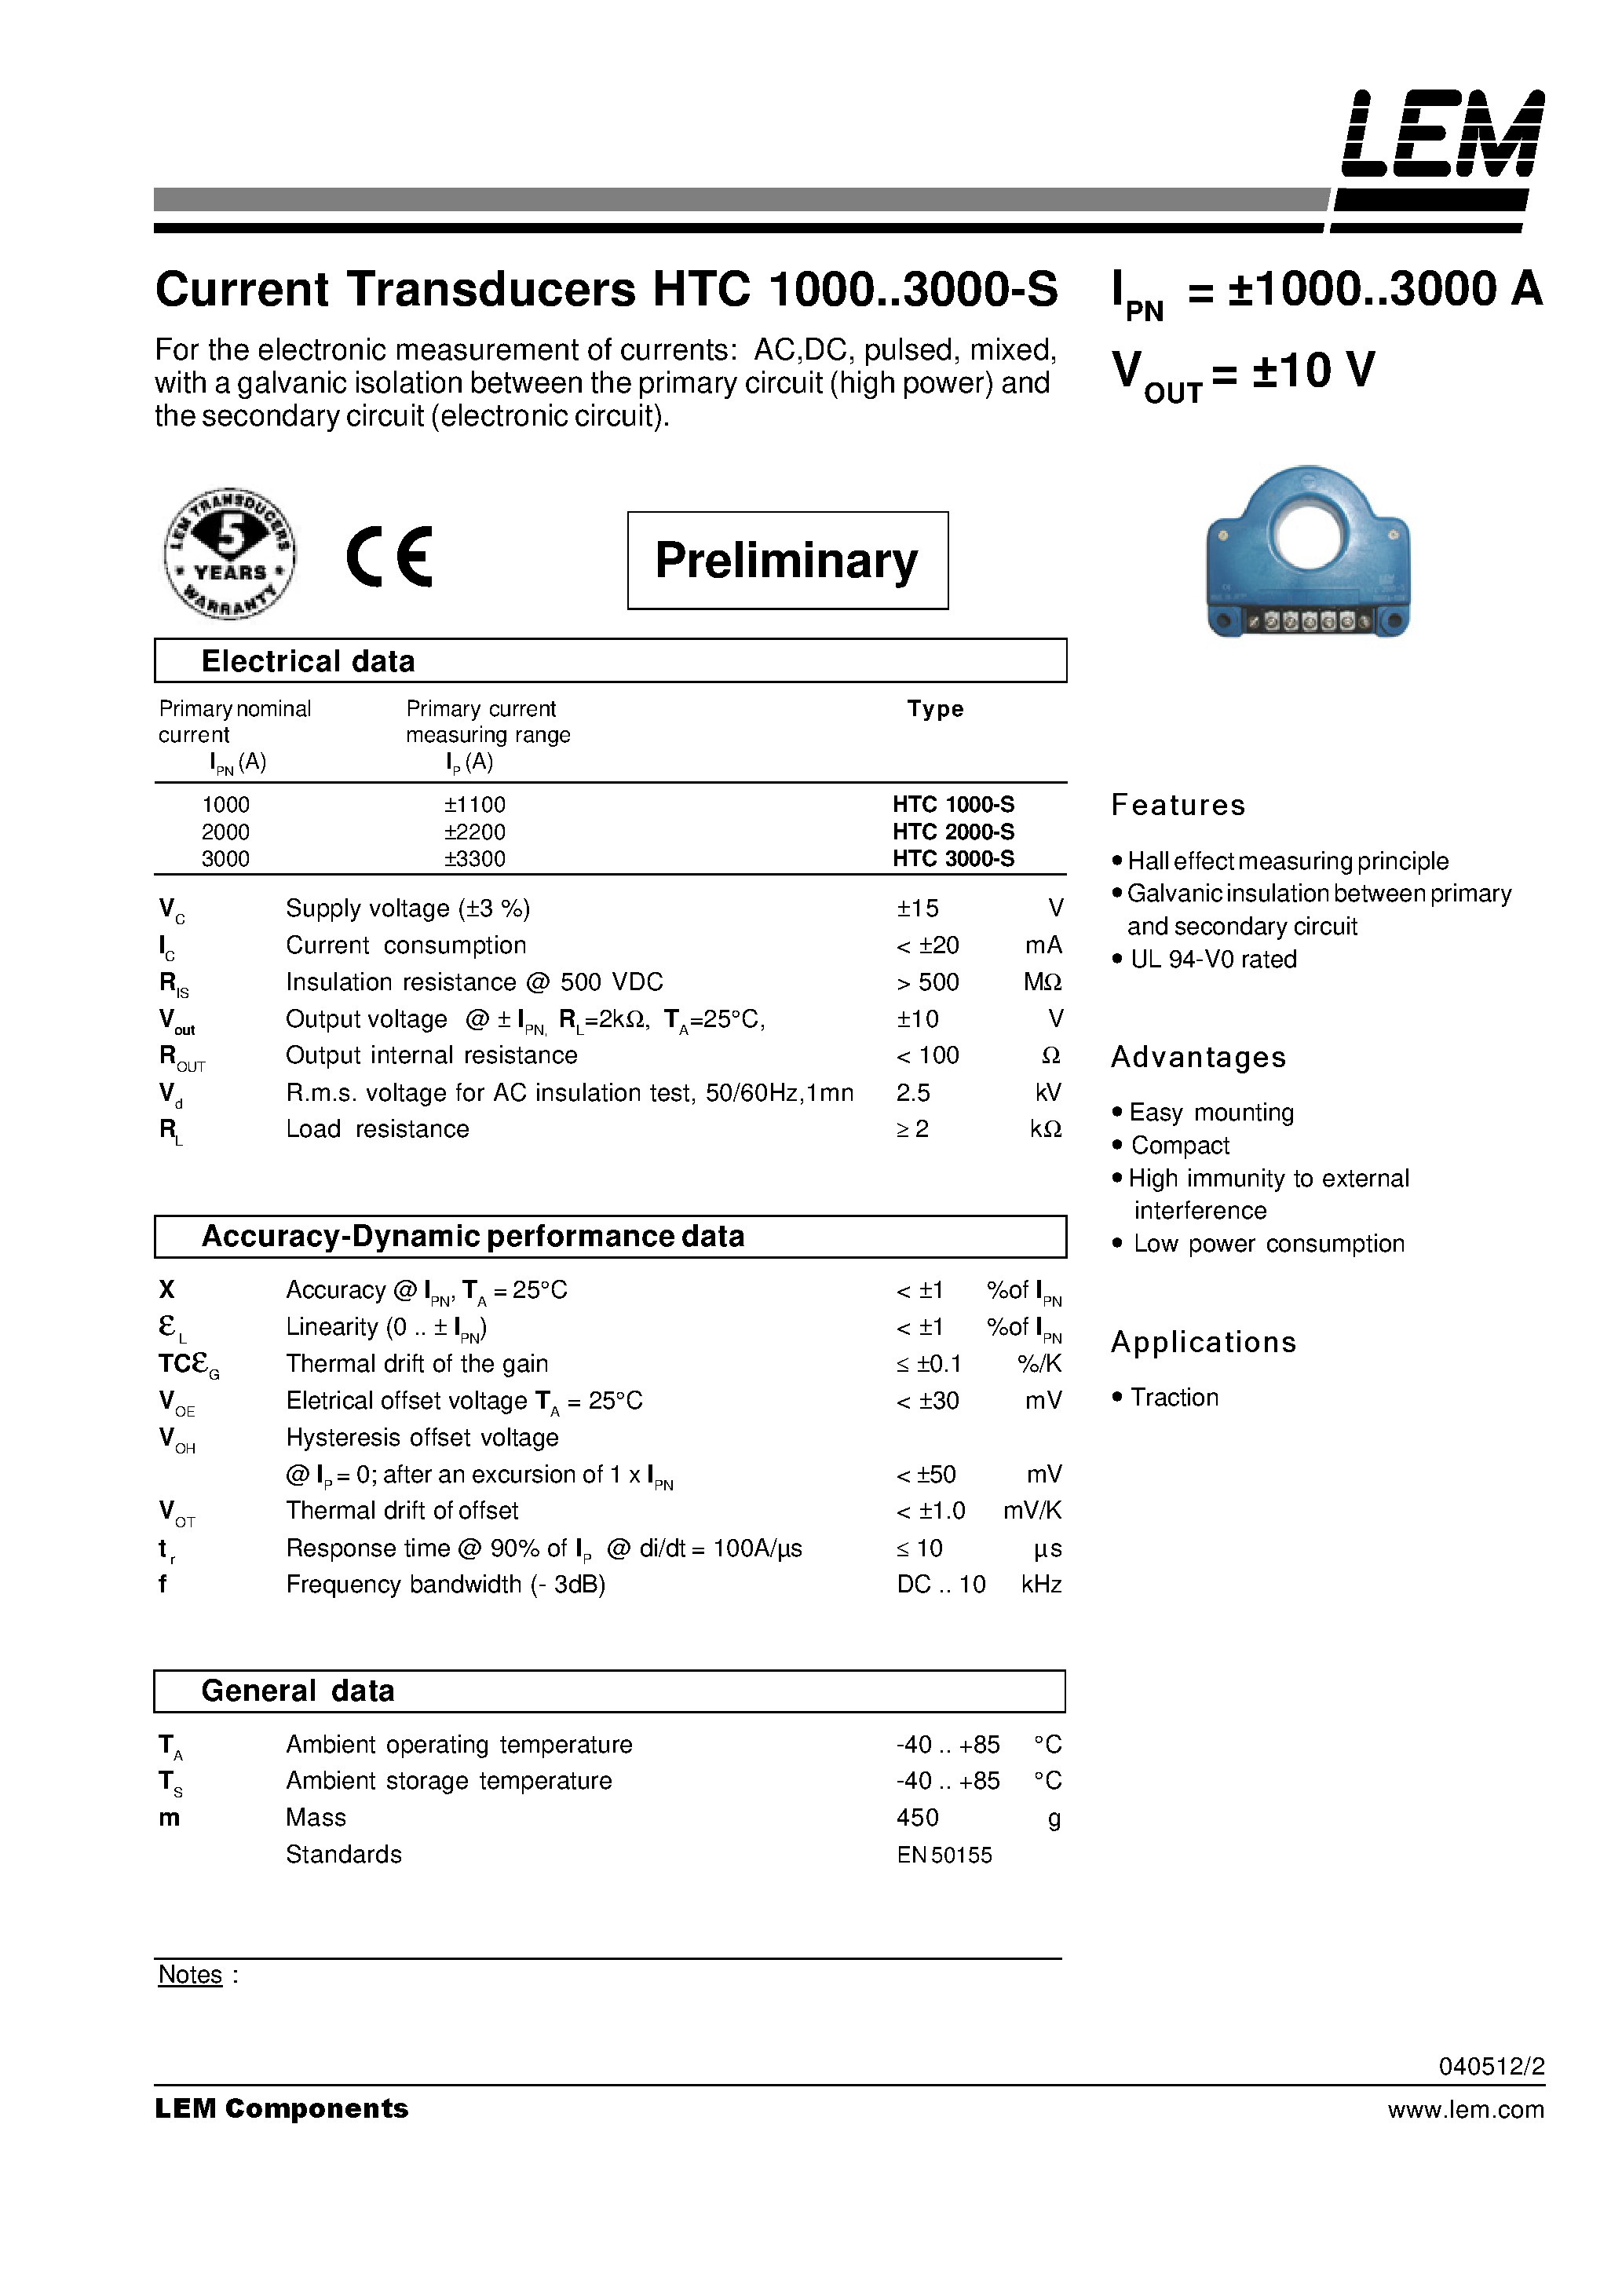 Datasheet HTC3000-S - Current Transducers HTC 1000~3000-S page 1